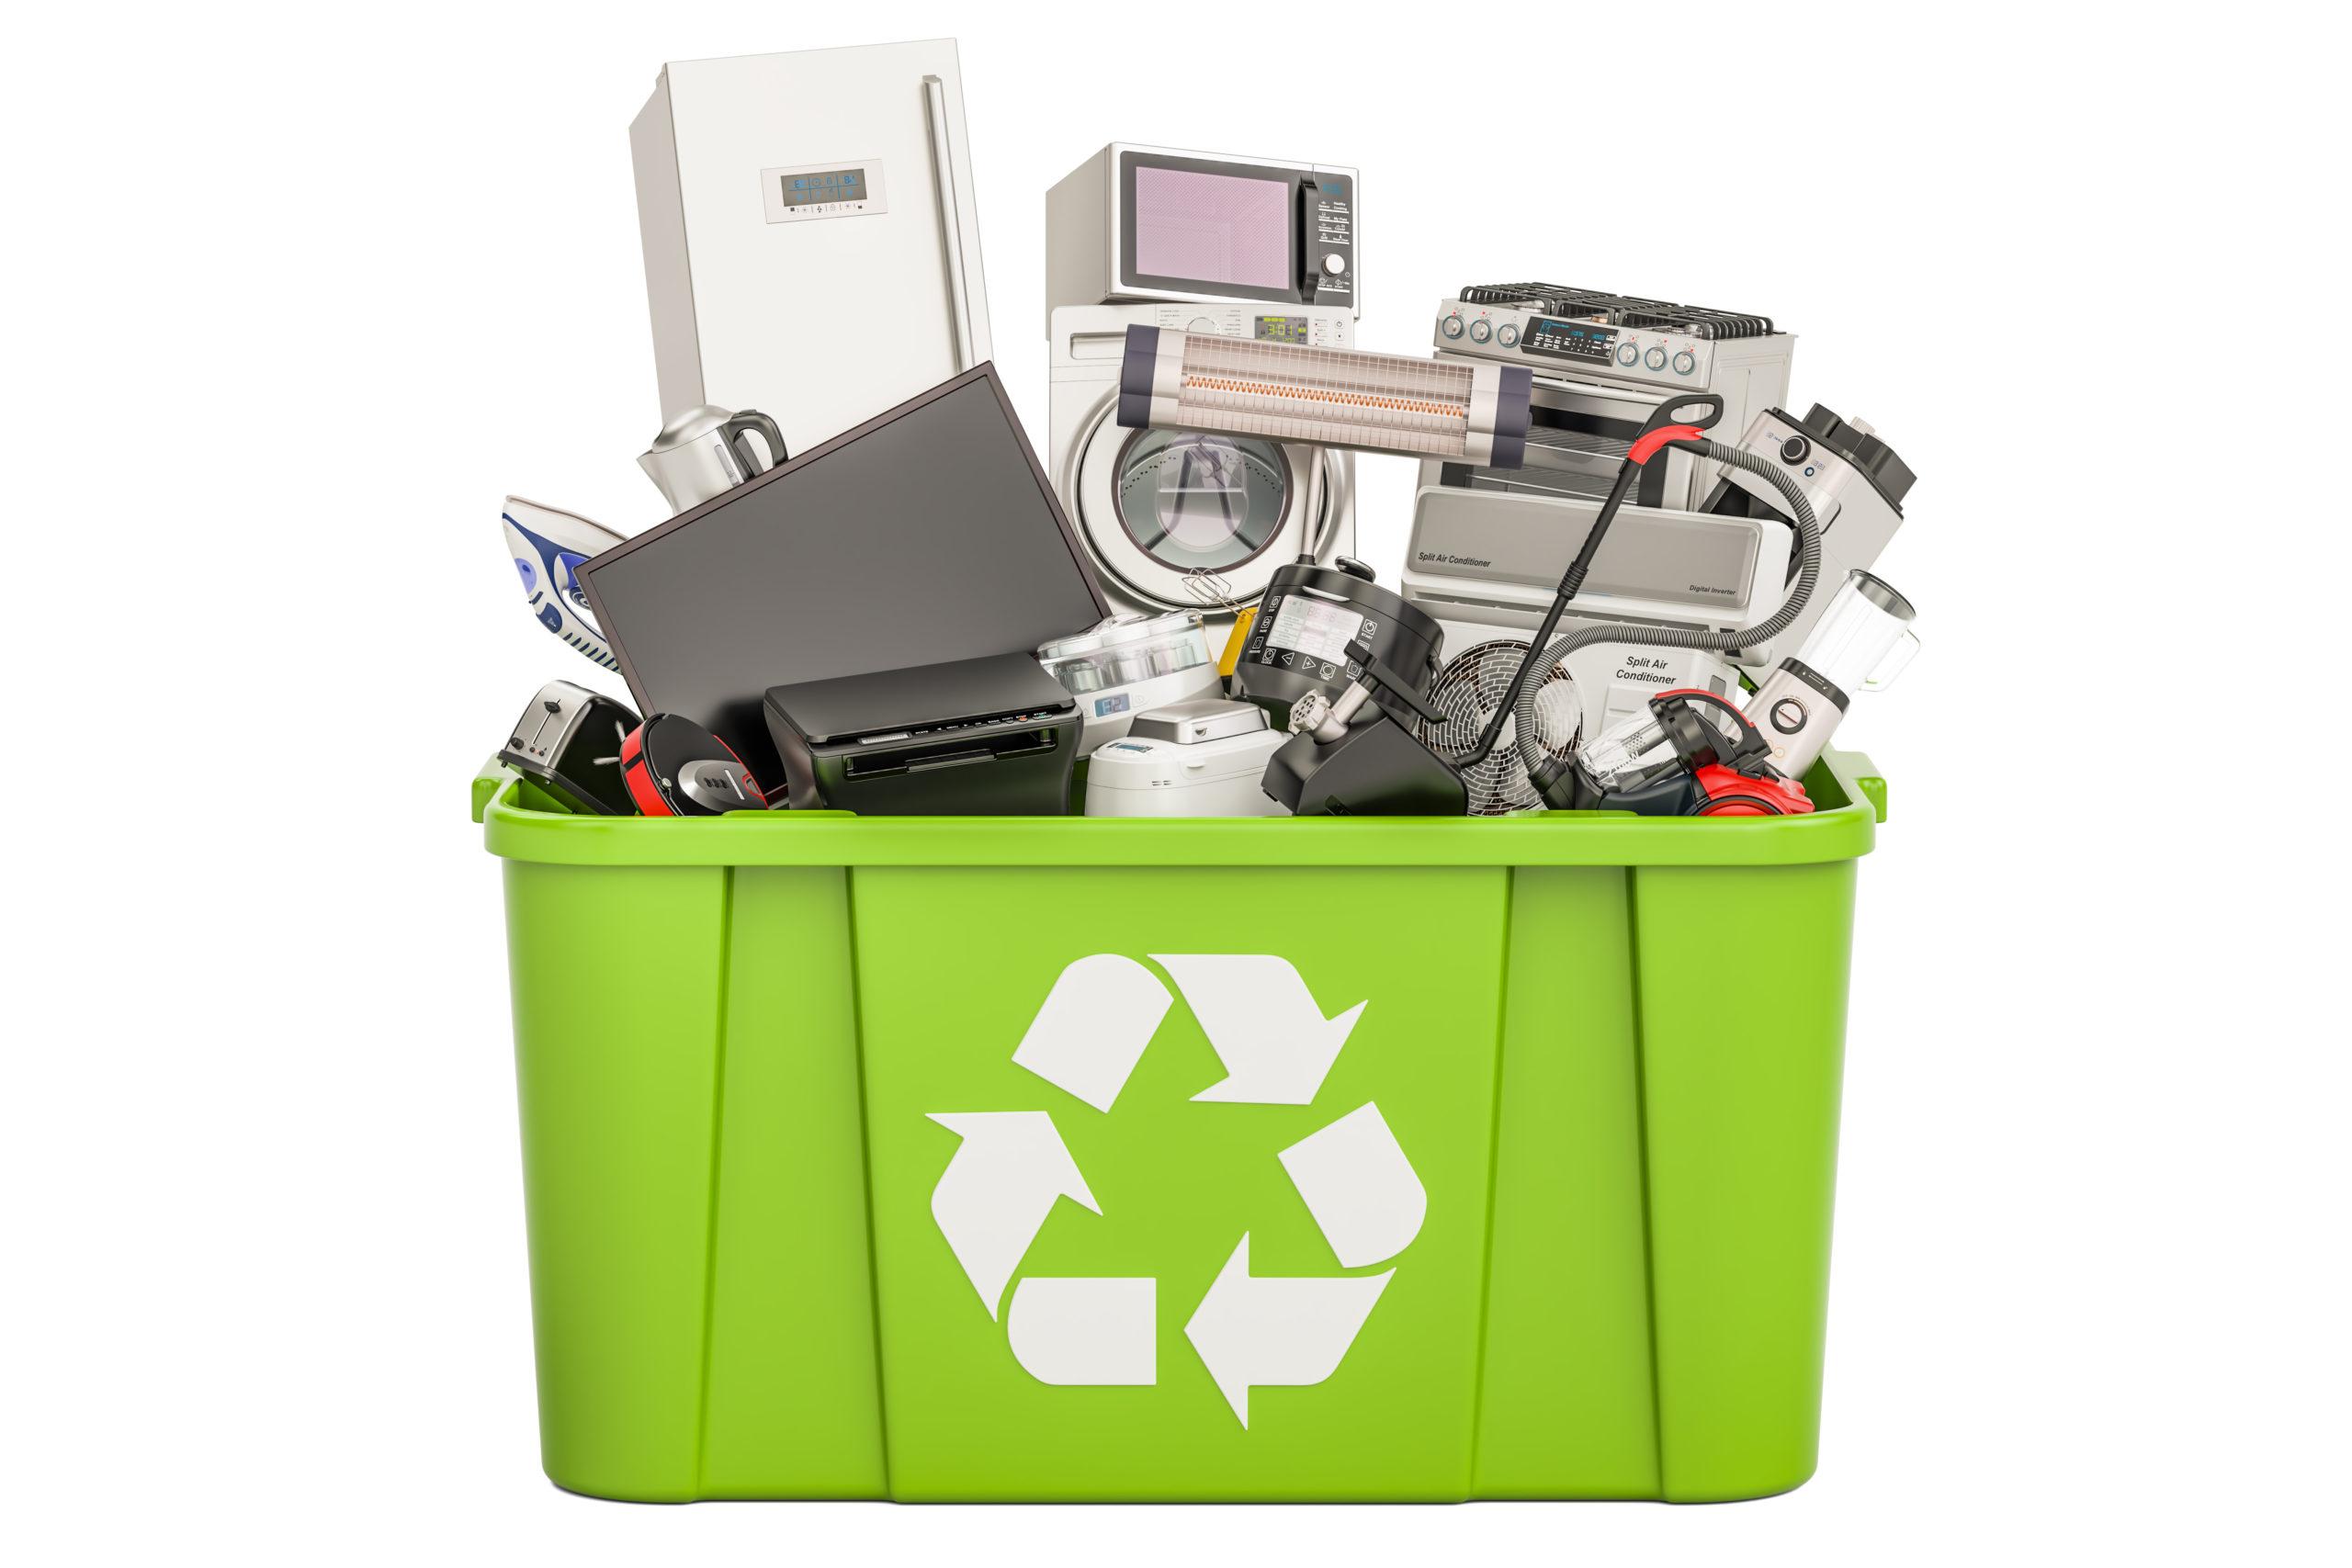 Electronics recycling event open to everyone